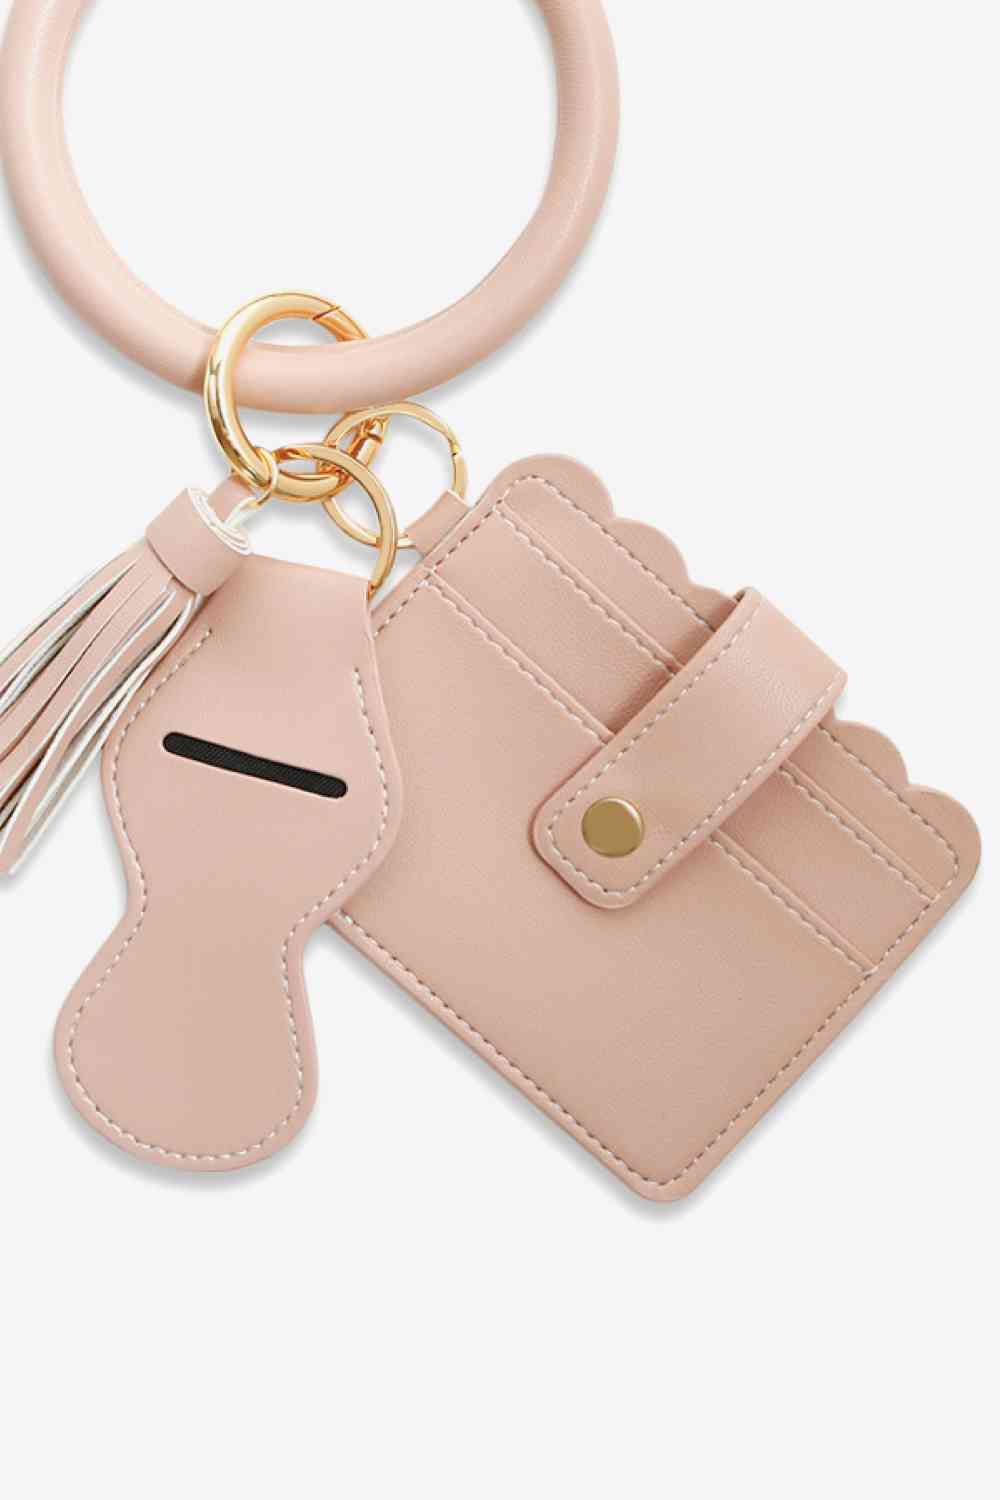 Last to Leave Wristlet - Cheeky Chic Boutique